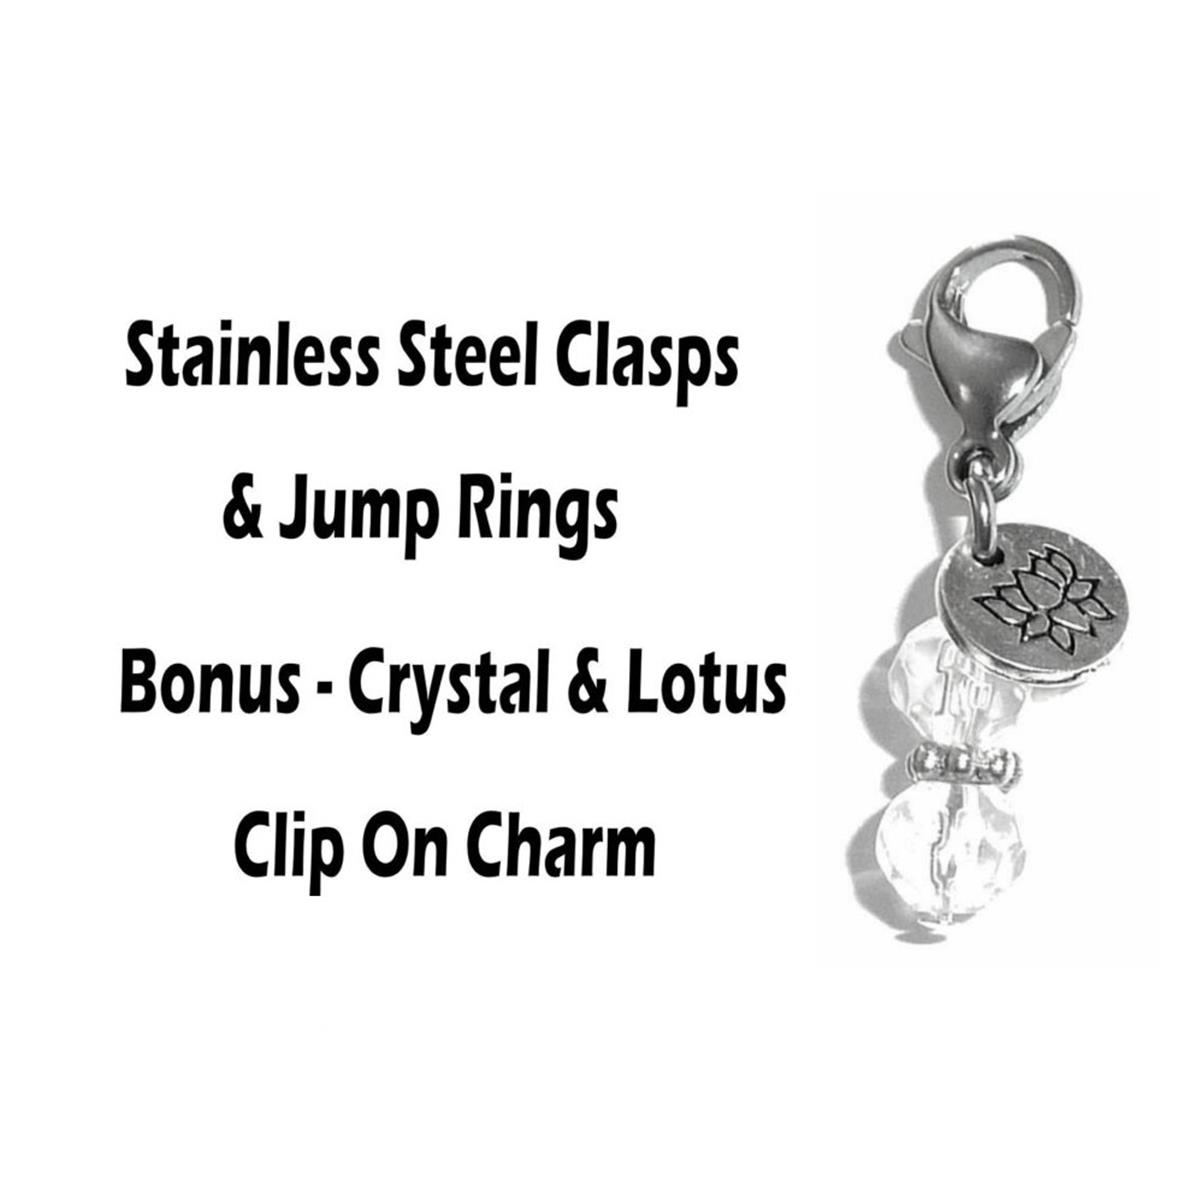 Wedding Family Clip On Charms - Wedding Party Charms Clip On Anywhere